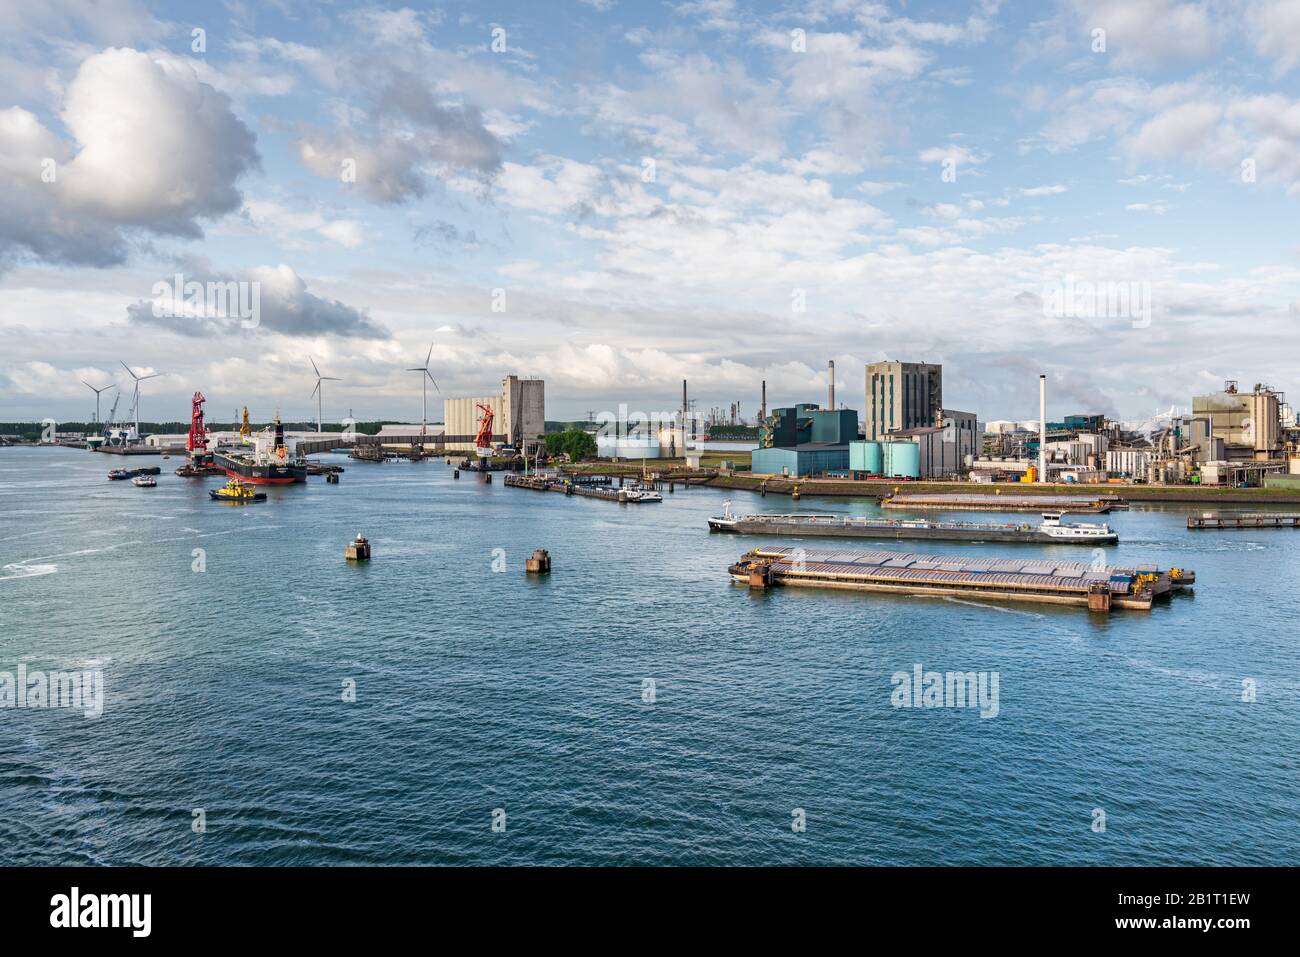 Rotterdam, South Holland, Netherlands - May 10, 2019: Ships and industry in the Beneluxhaven of Europoort Stock Photo